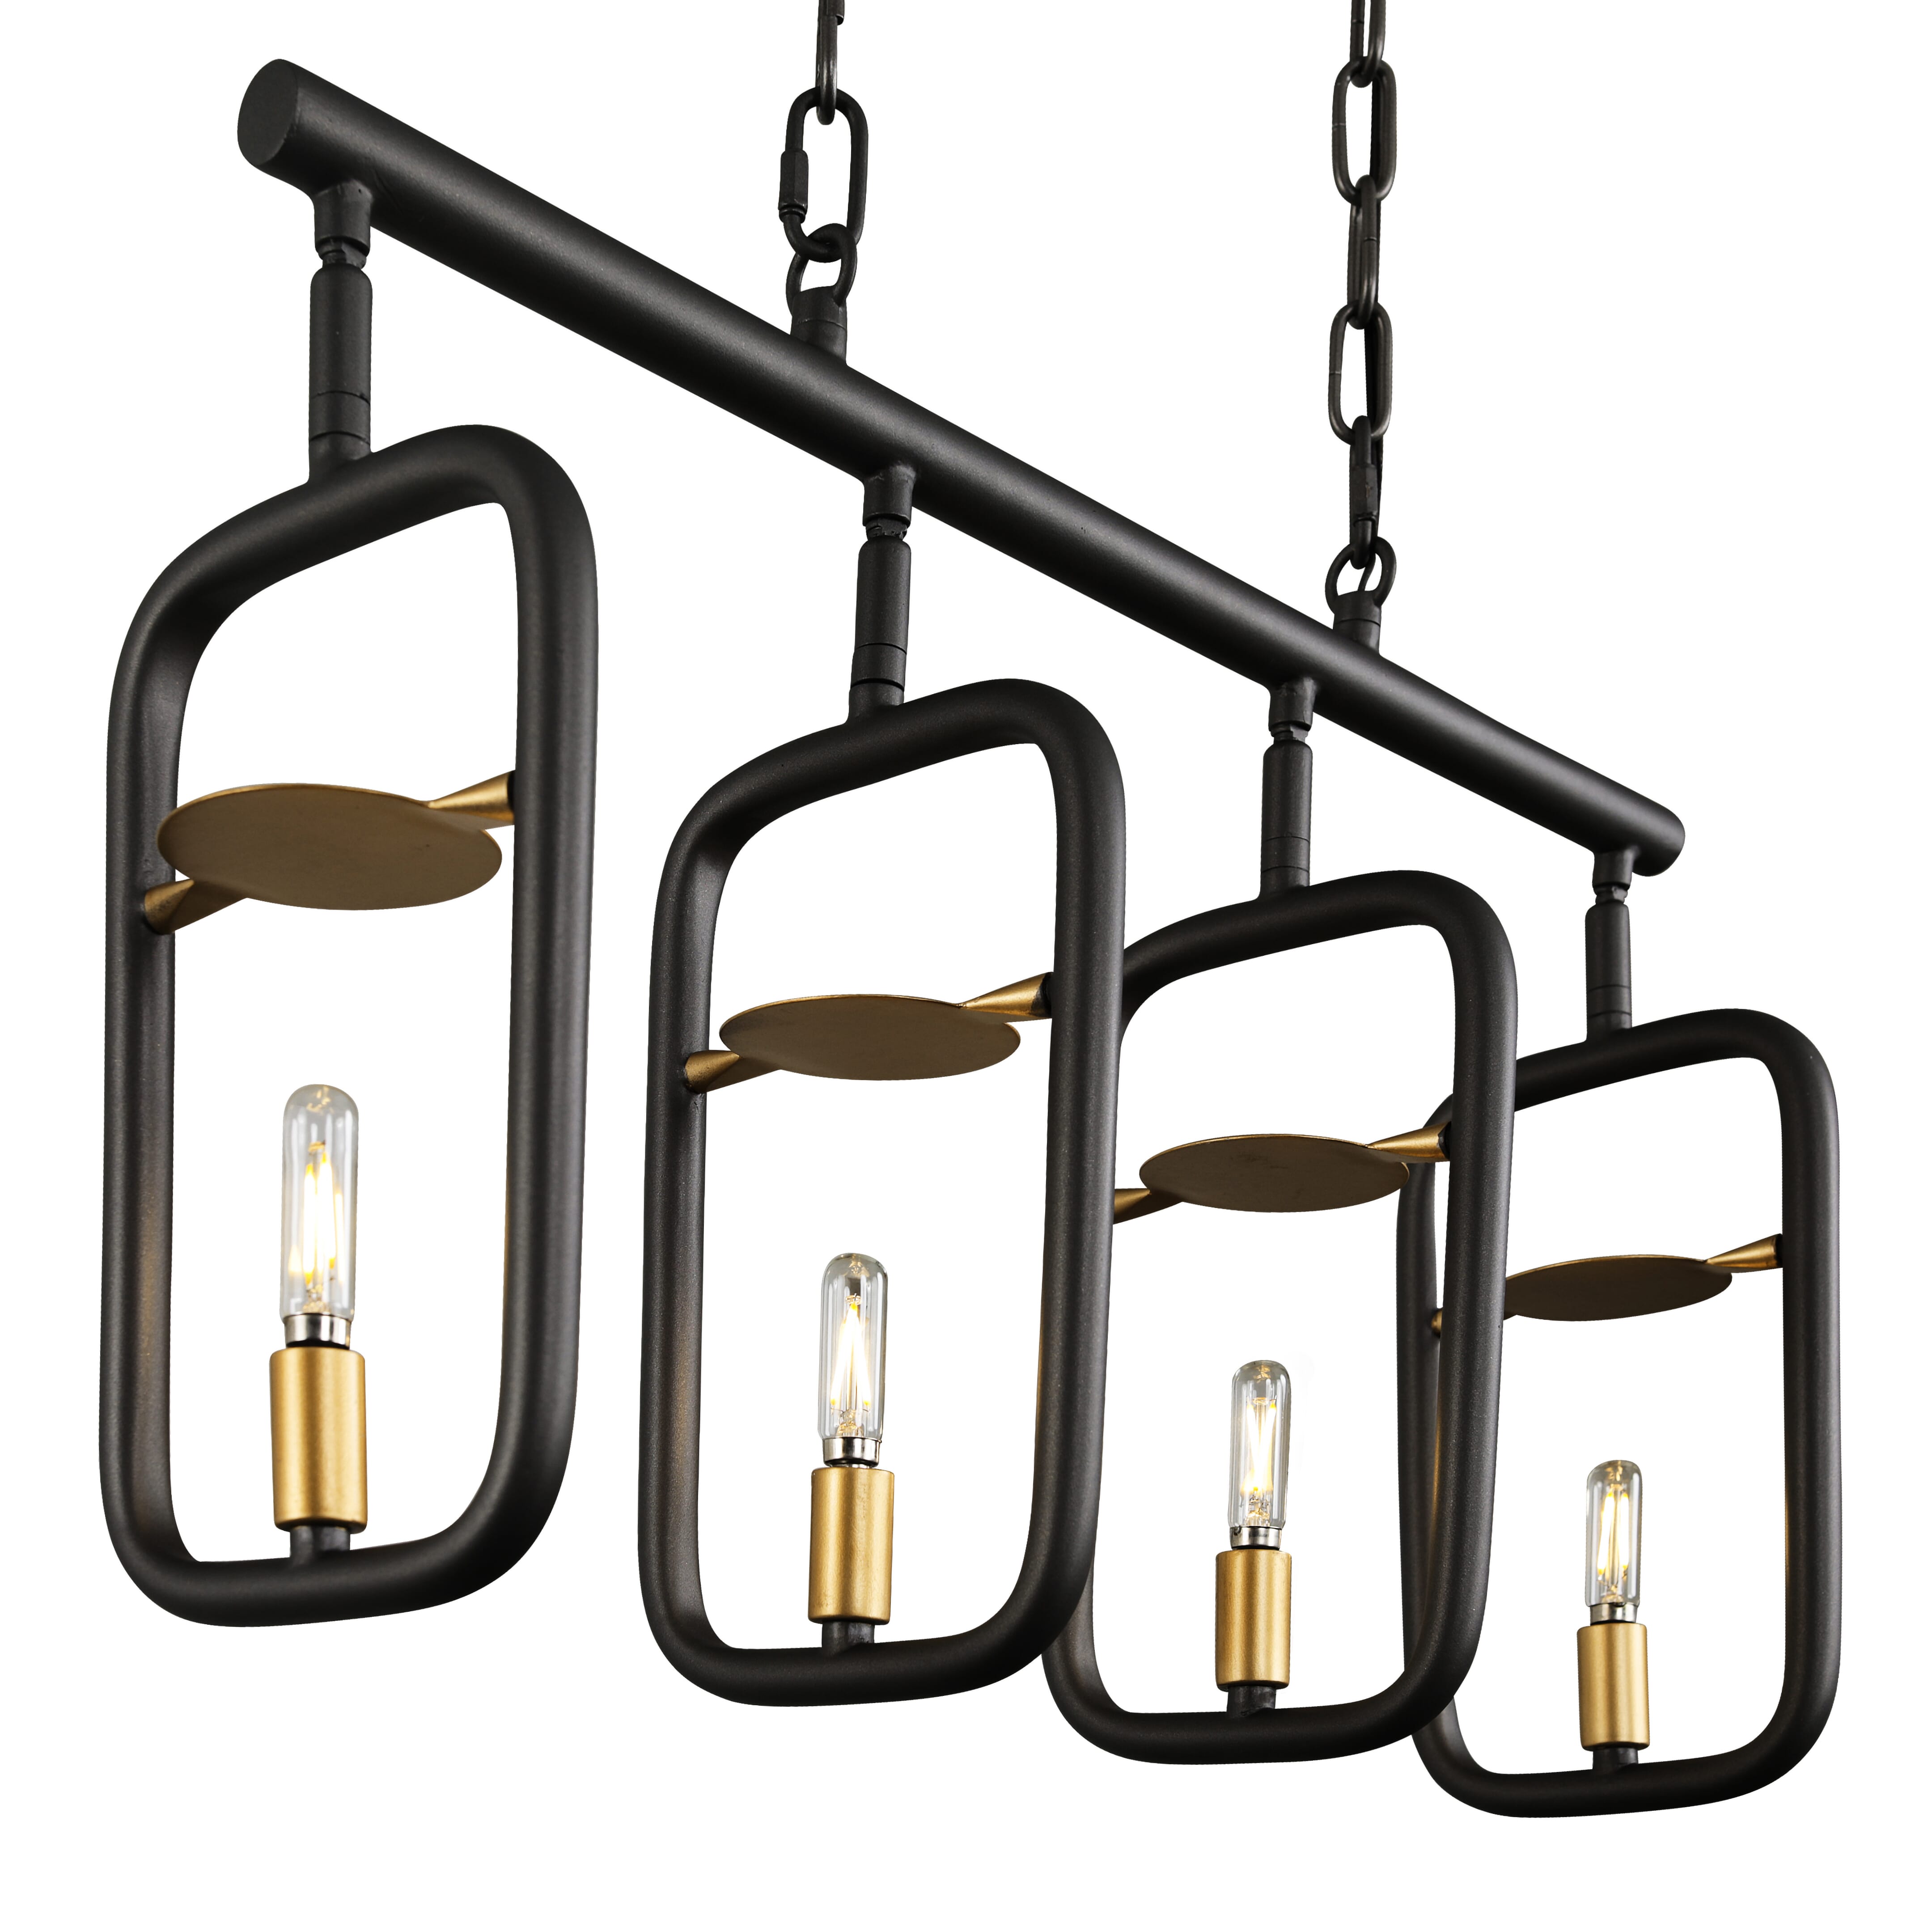 Bar None 4-Light 26"" Linear Pendant in Aged Gold with Rustic Bronze -  Varaluz, 327N04AGRB